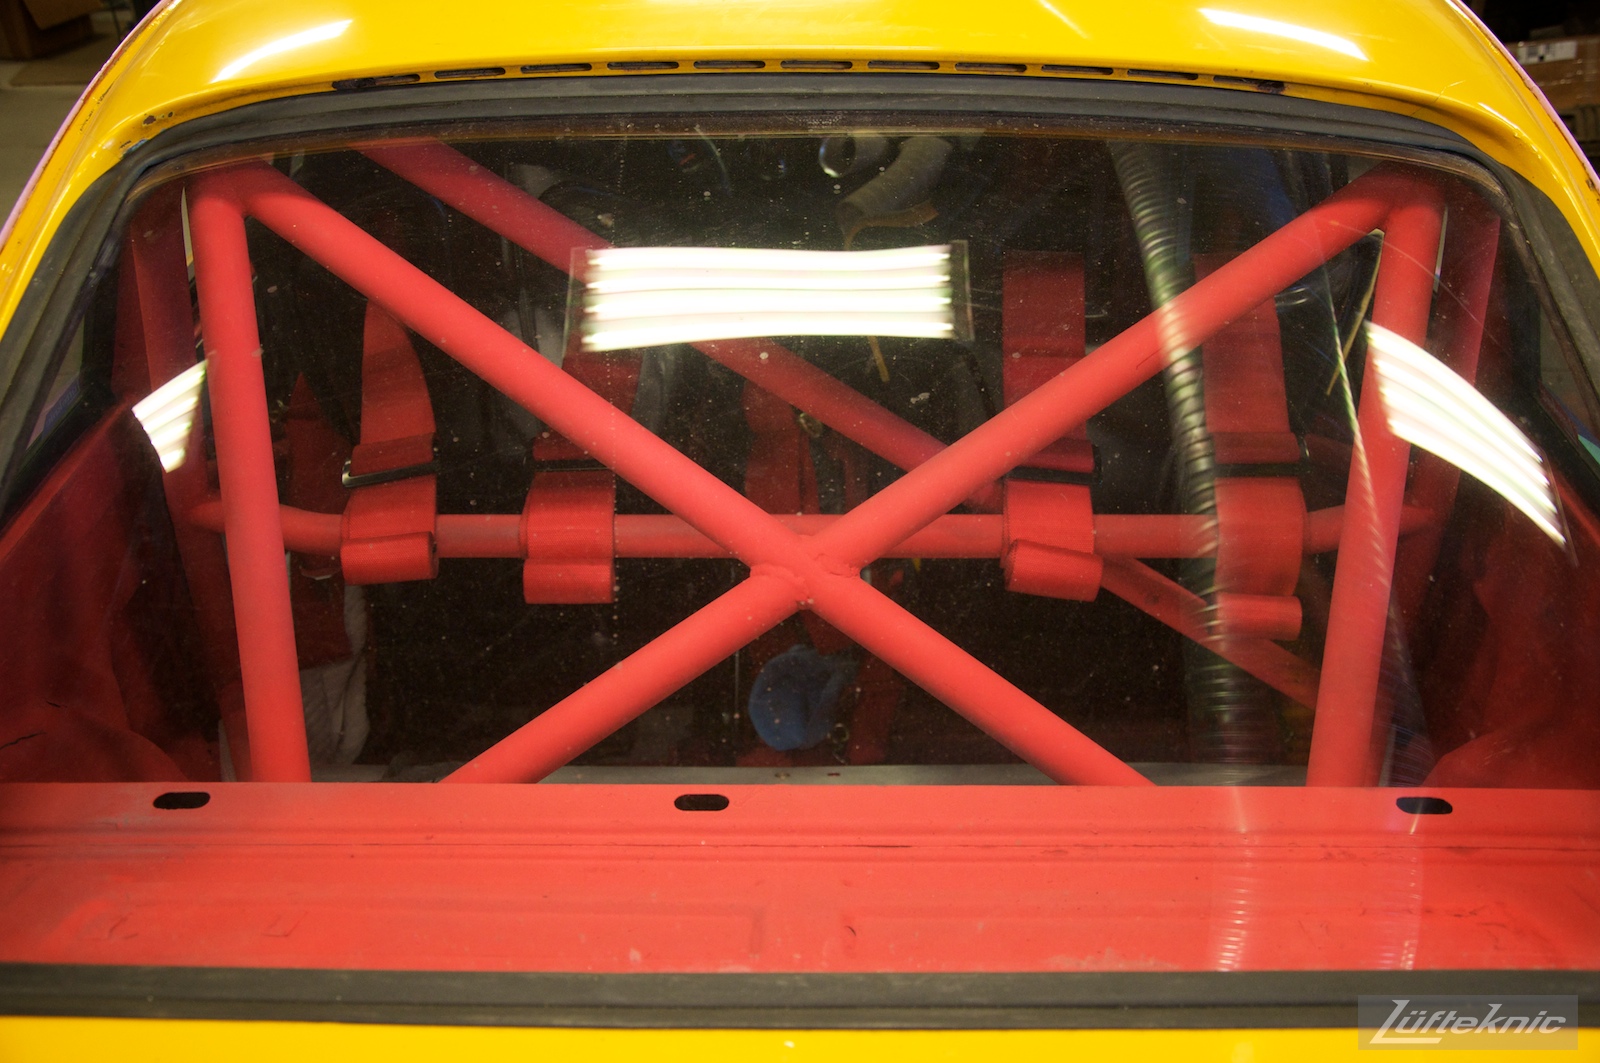 The beefy red roll cage of Lüfteknic #projectstuka Porsche 930 Turbo framed by yellow paint